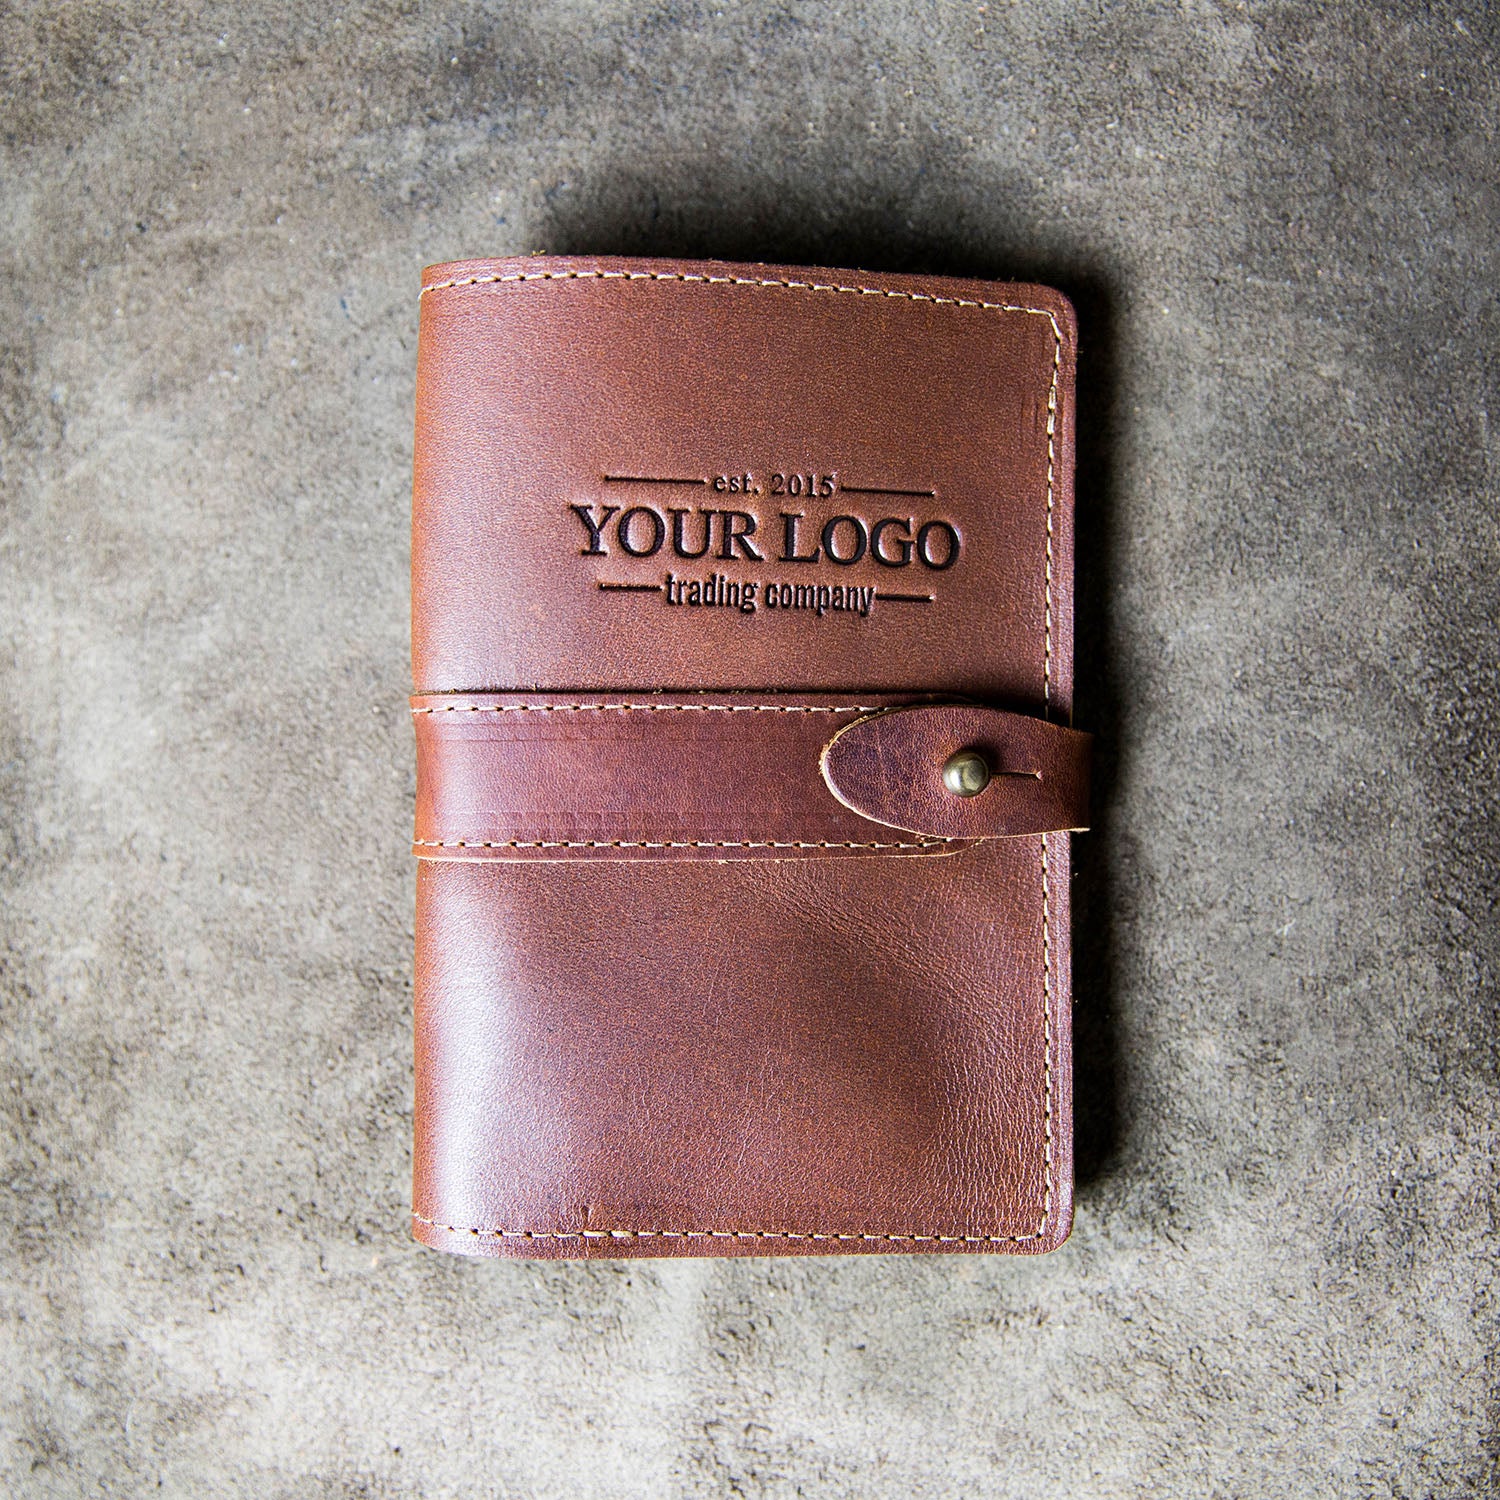 The Logbook Fine Leather Field Notes Moleskine Wallet Pocketbook Cover